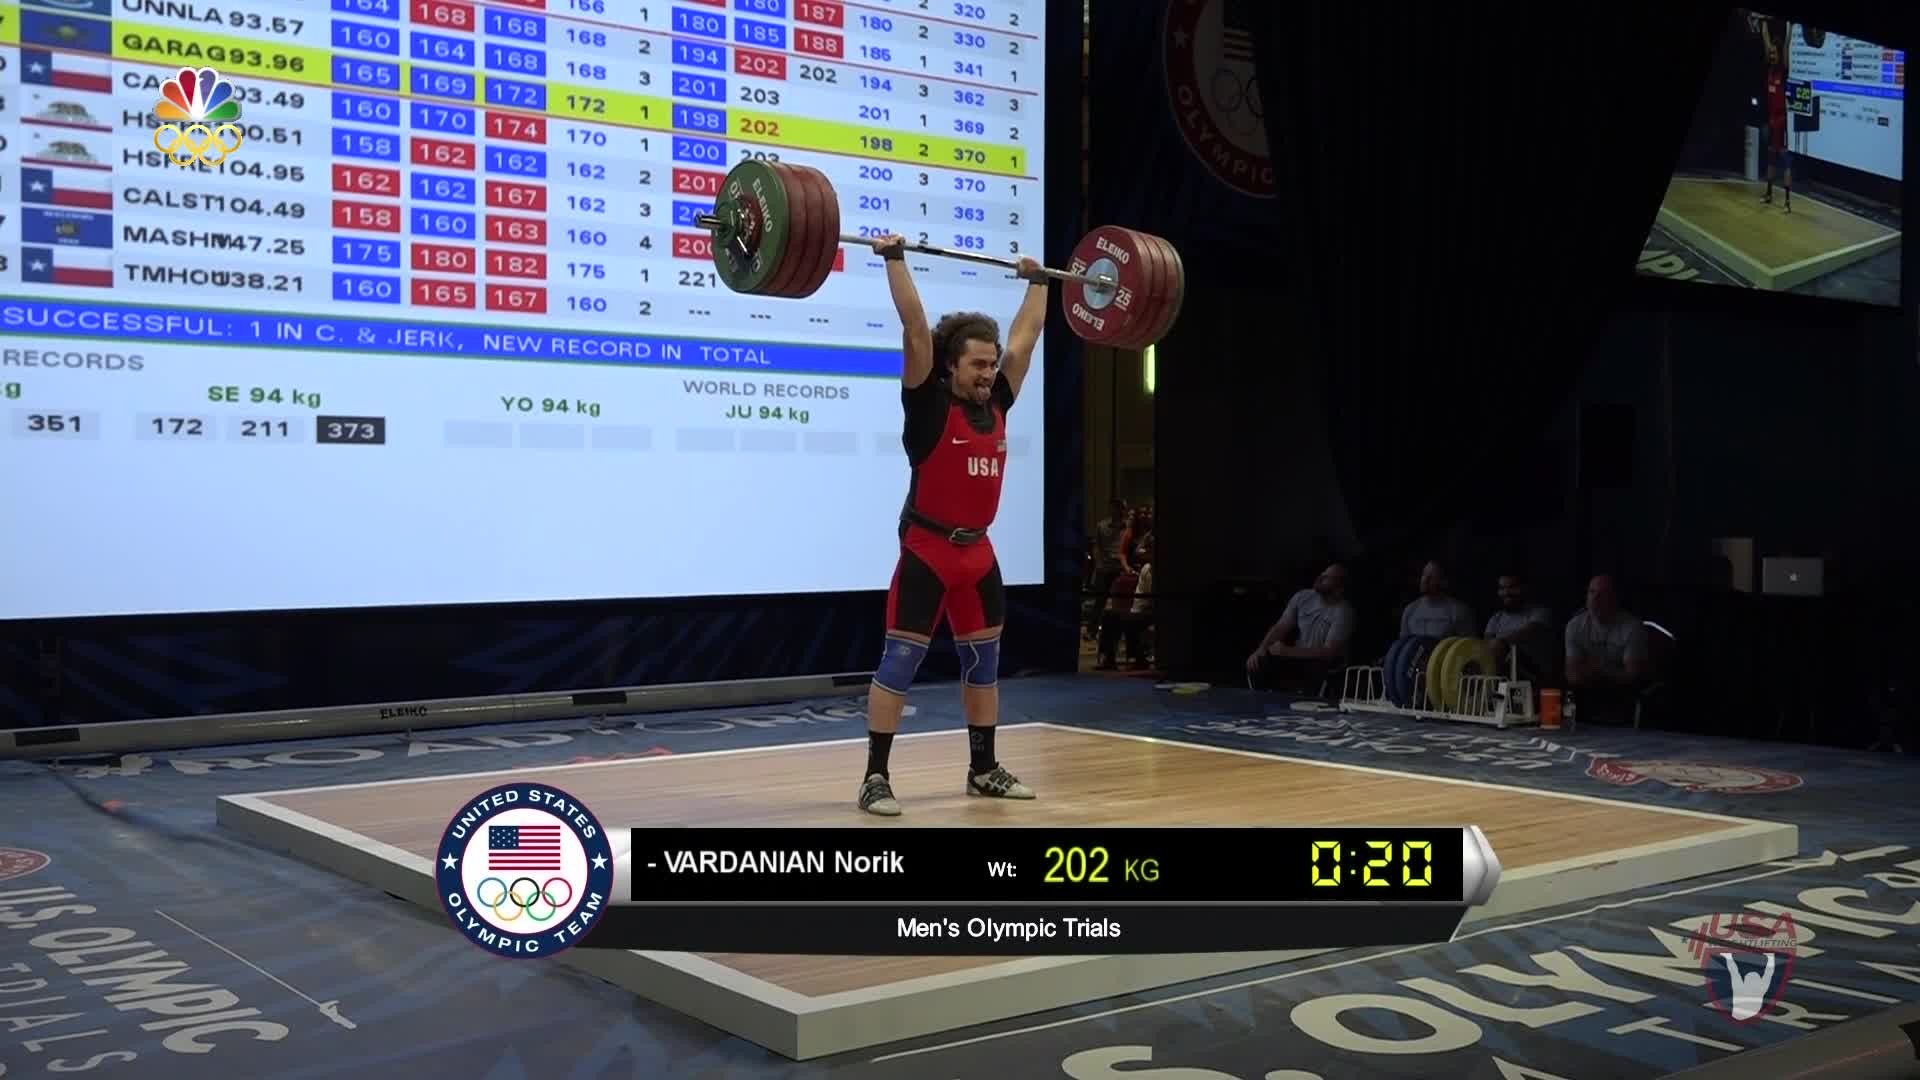 1920x1080 2:12 Norik Vardanian Dominates At Olympic Team Trials For Weightlifting